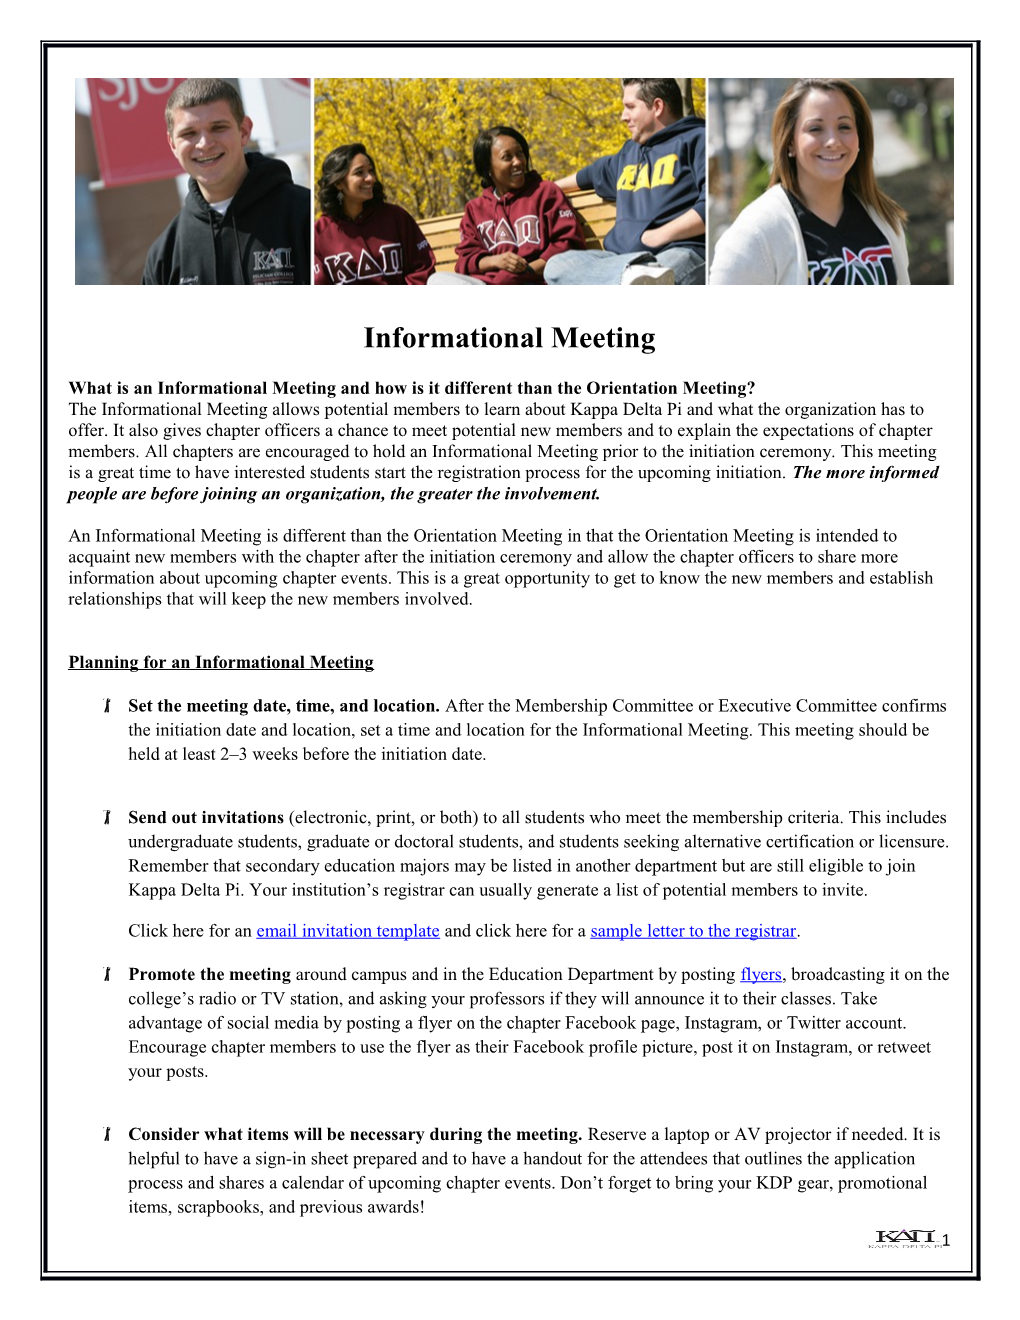 What Is an Informational Meeting and How Is It Different Than the Orientation Meeting?